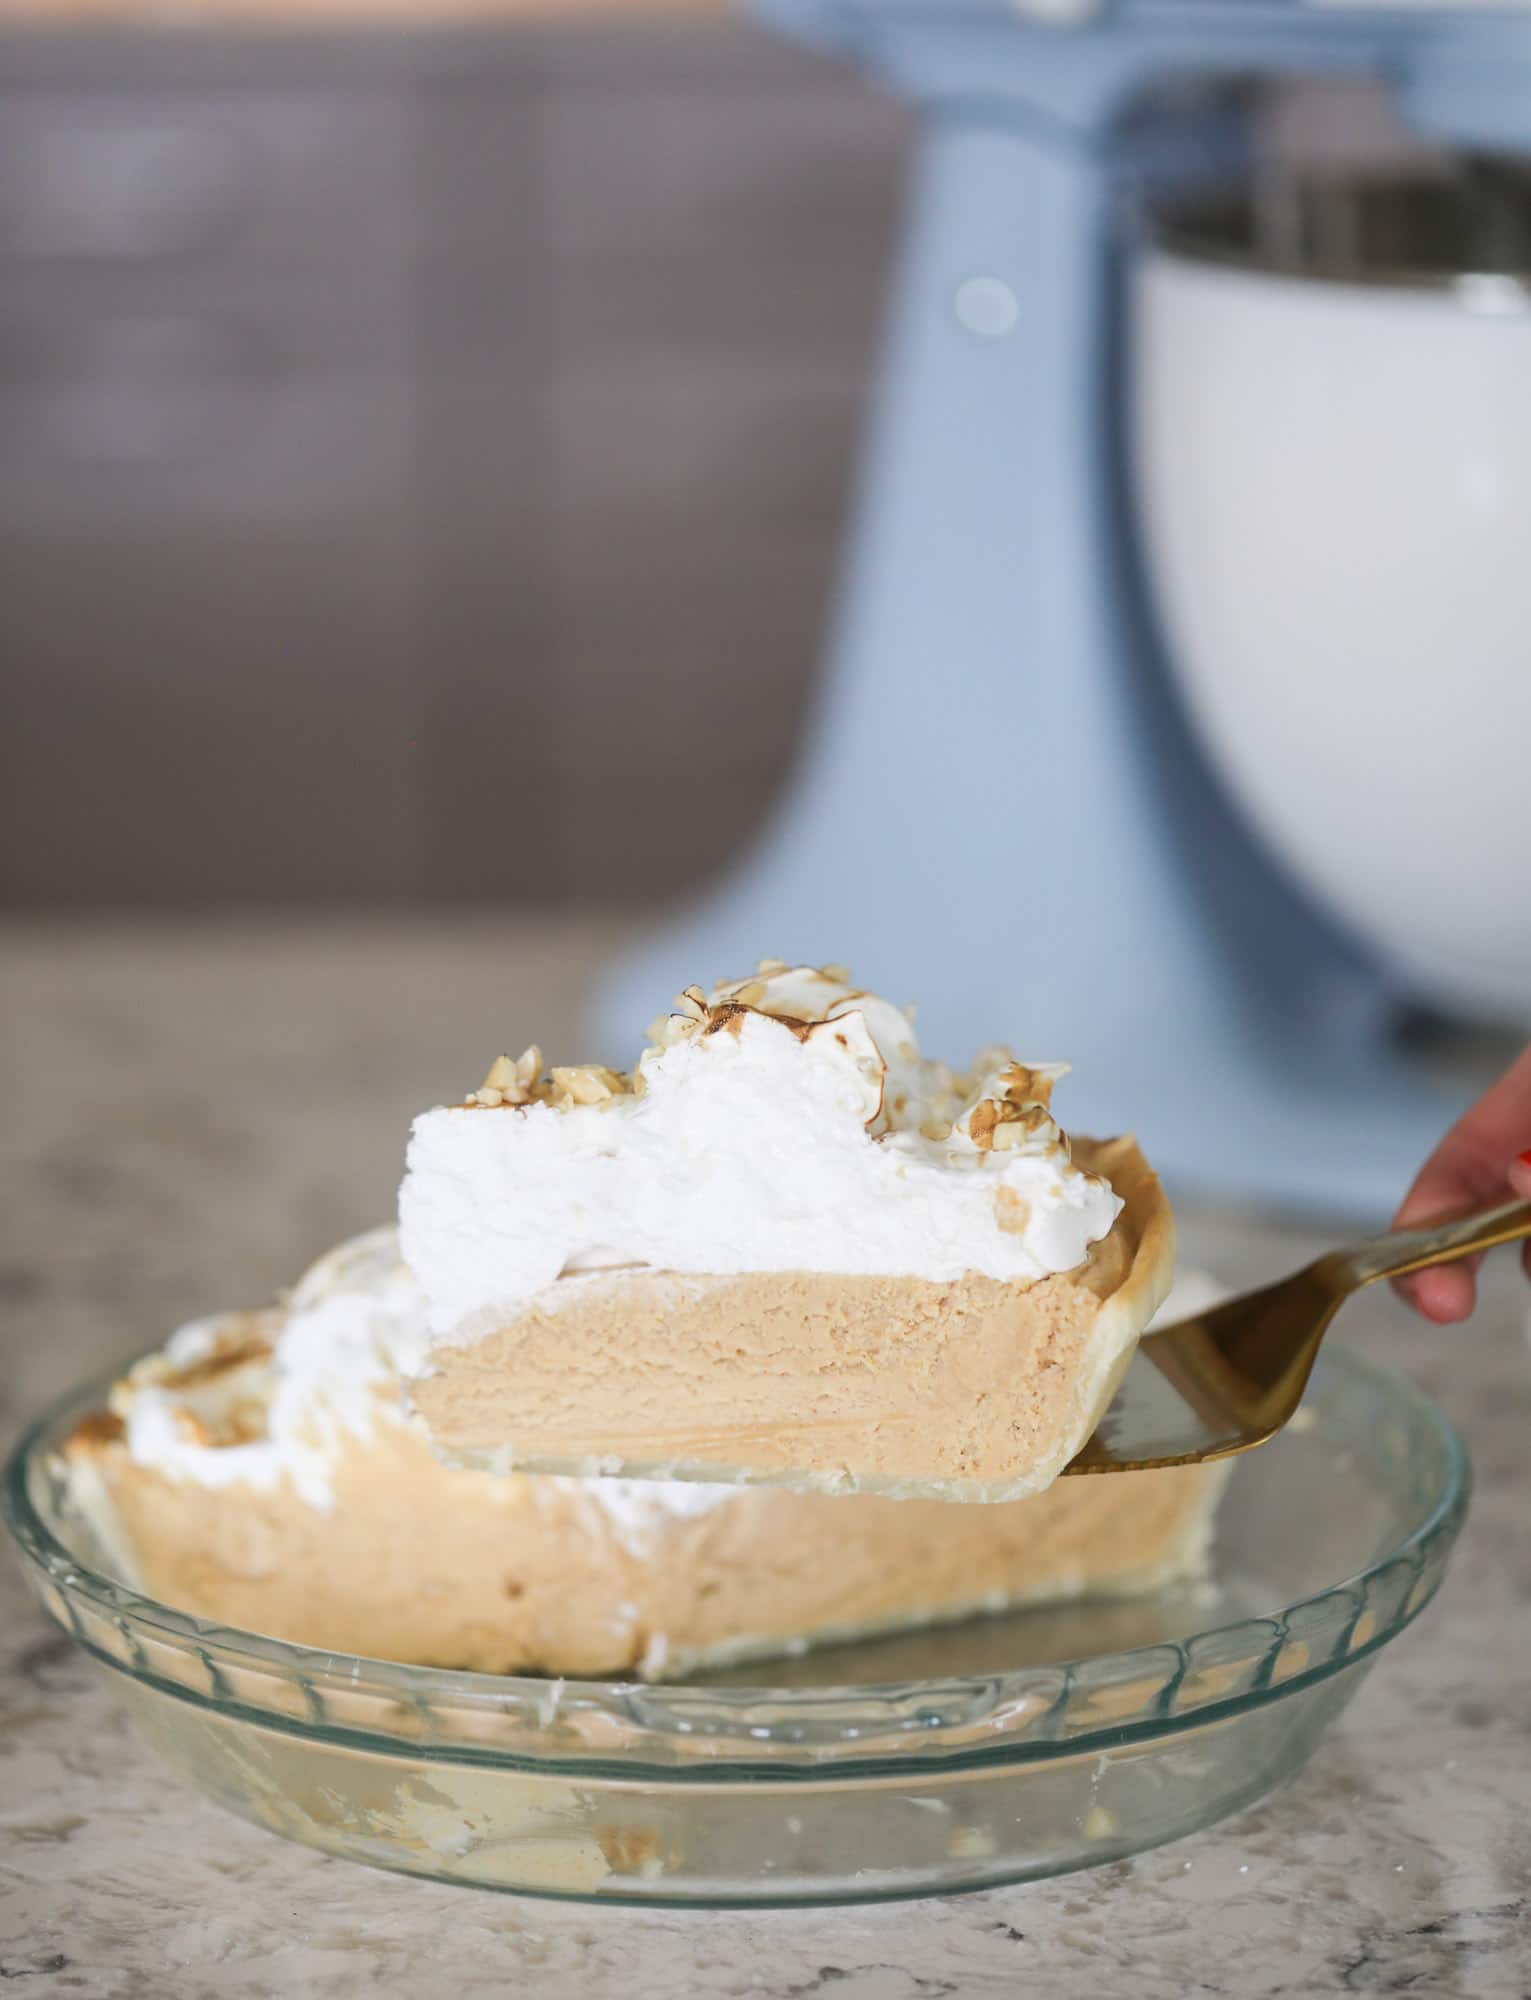 This peanut butter pie recipe is almost identical to the one that my grandmother made when I was a crust. Flaky pastry crust is what makes this pie different, along with a creamy no-bake peanut butter filling that is rich and decadent! I howsweeteats.com #peanutbutter #pie